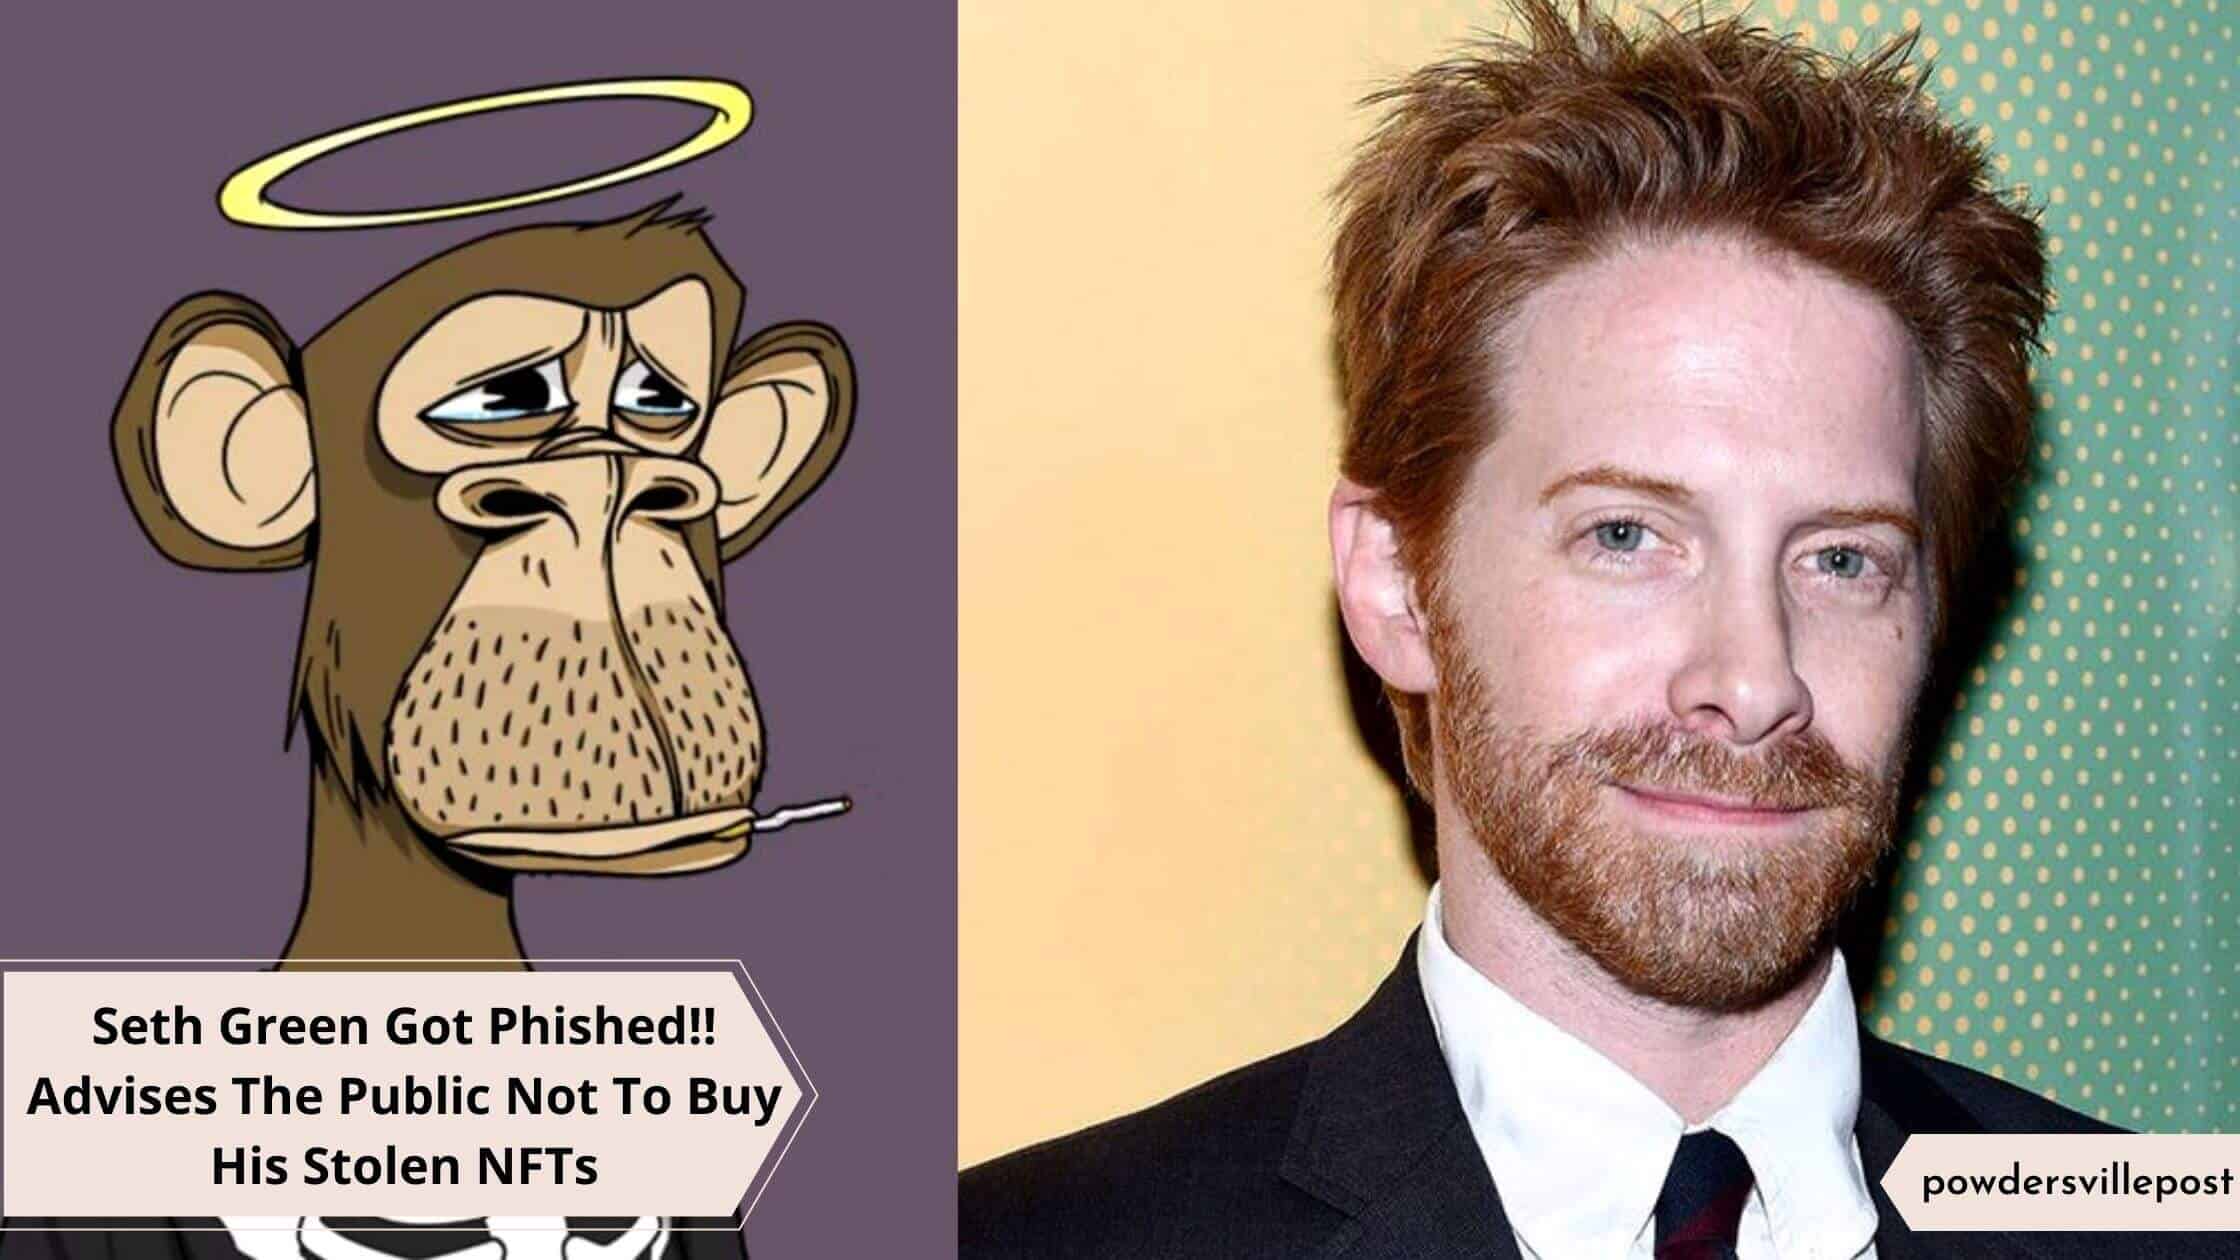 Seth Green Got Phished!! Advises The Public Not To Buy His Stolen NFTs